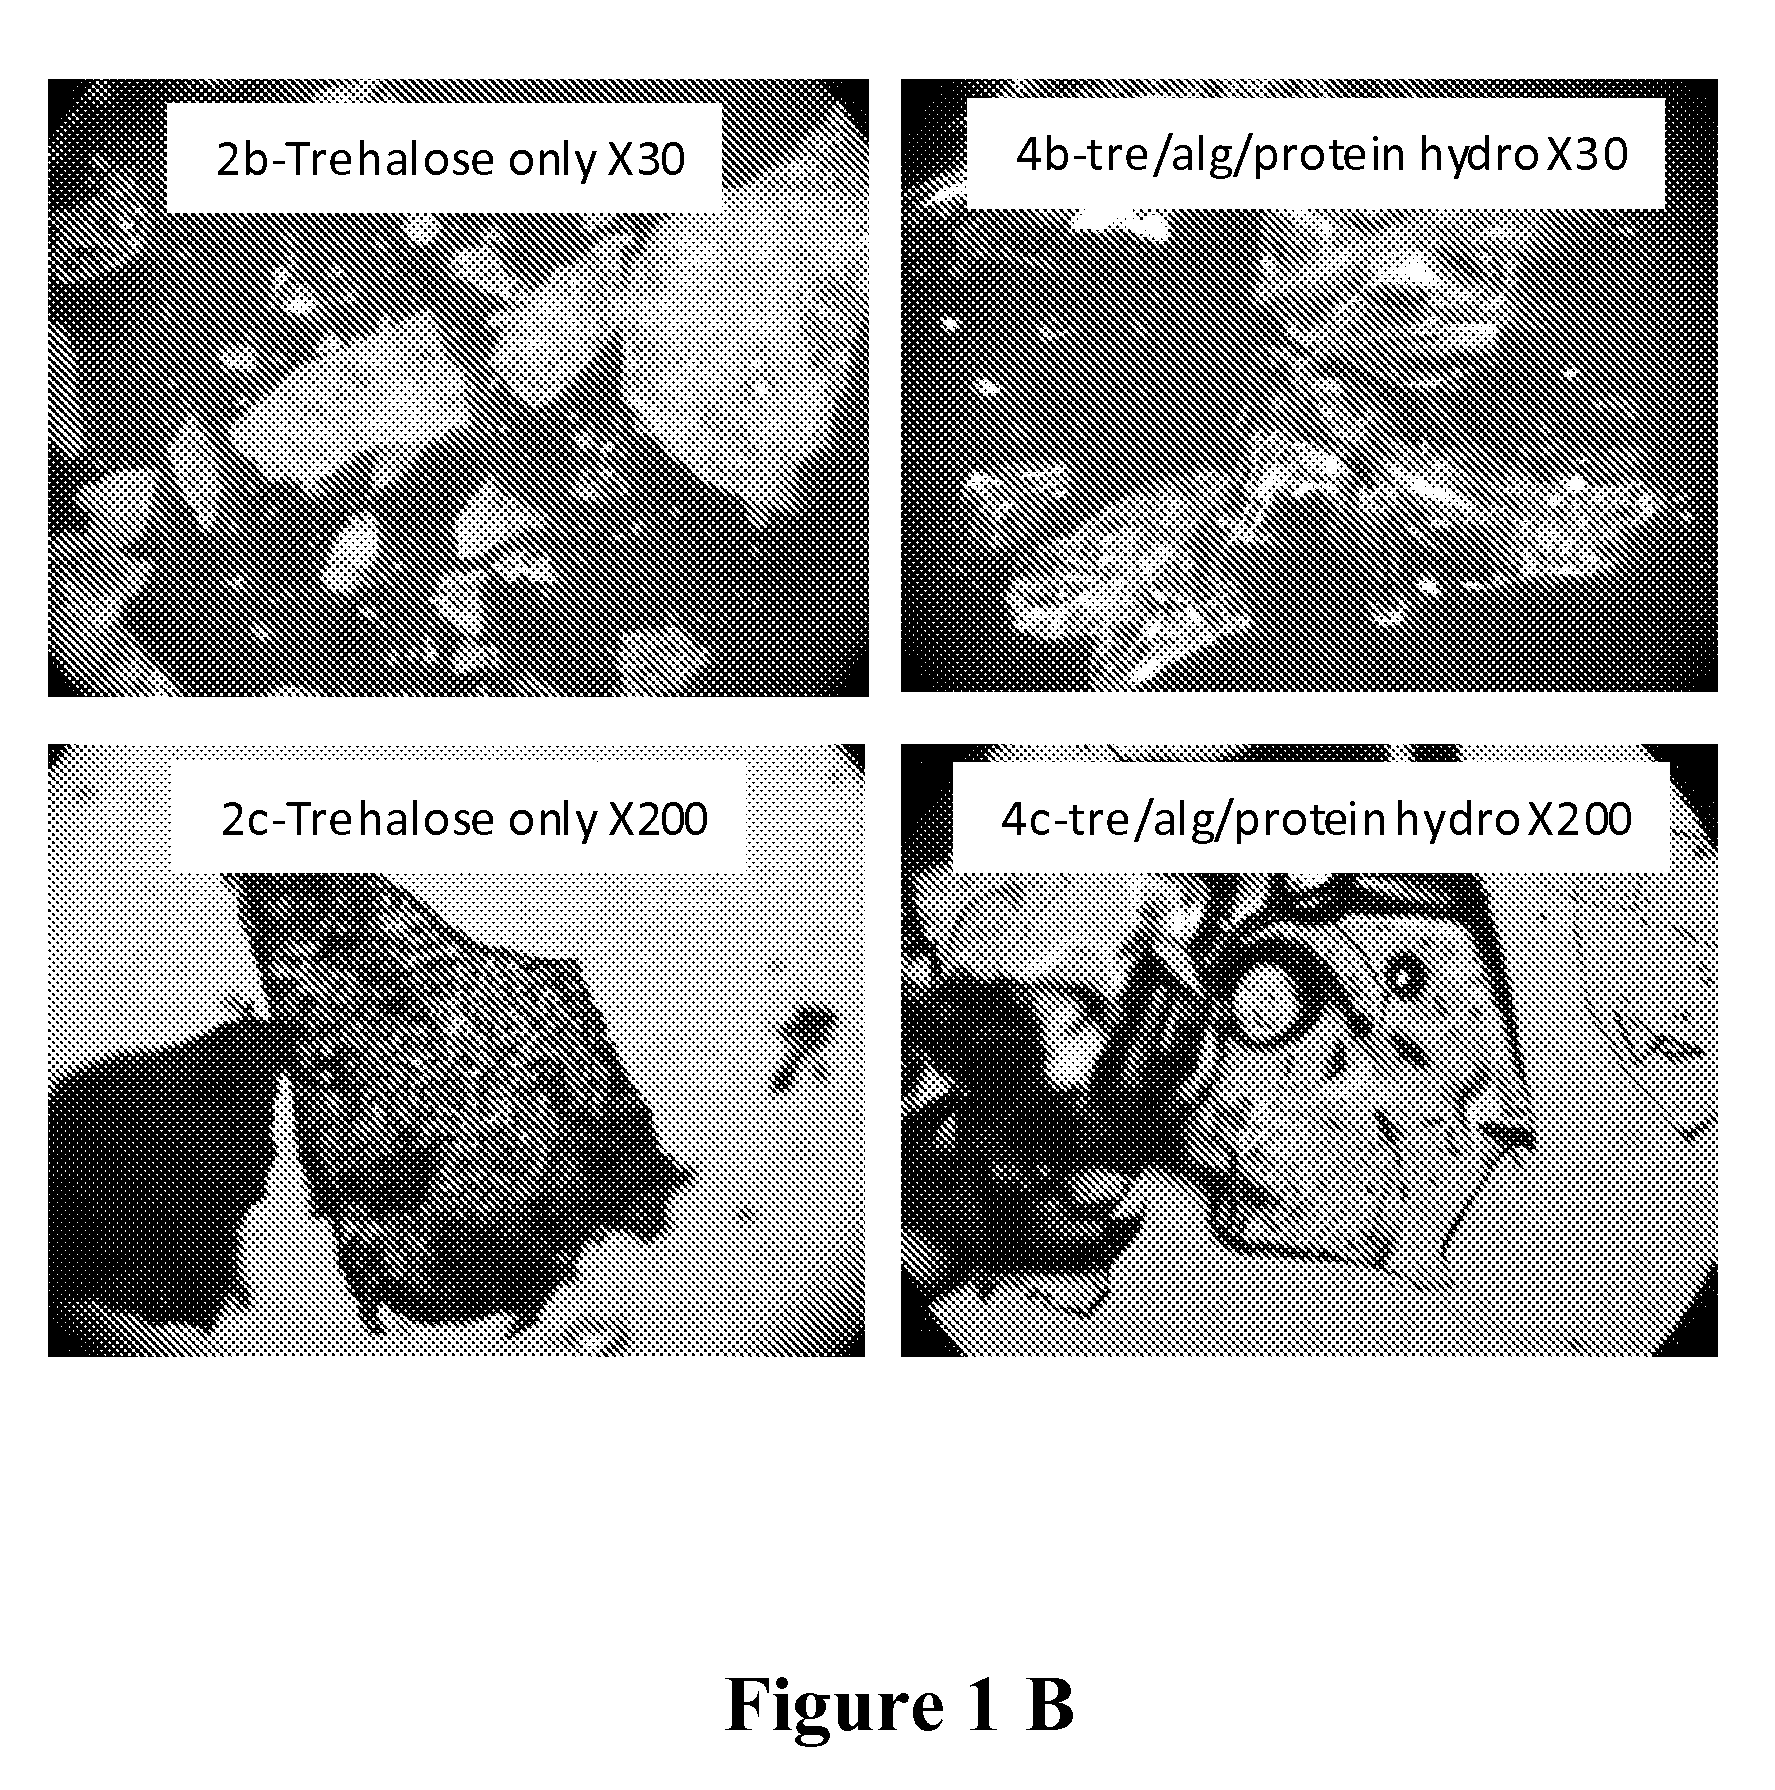 Dry glassy composition comprising a bioactive material